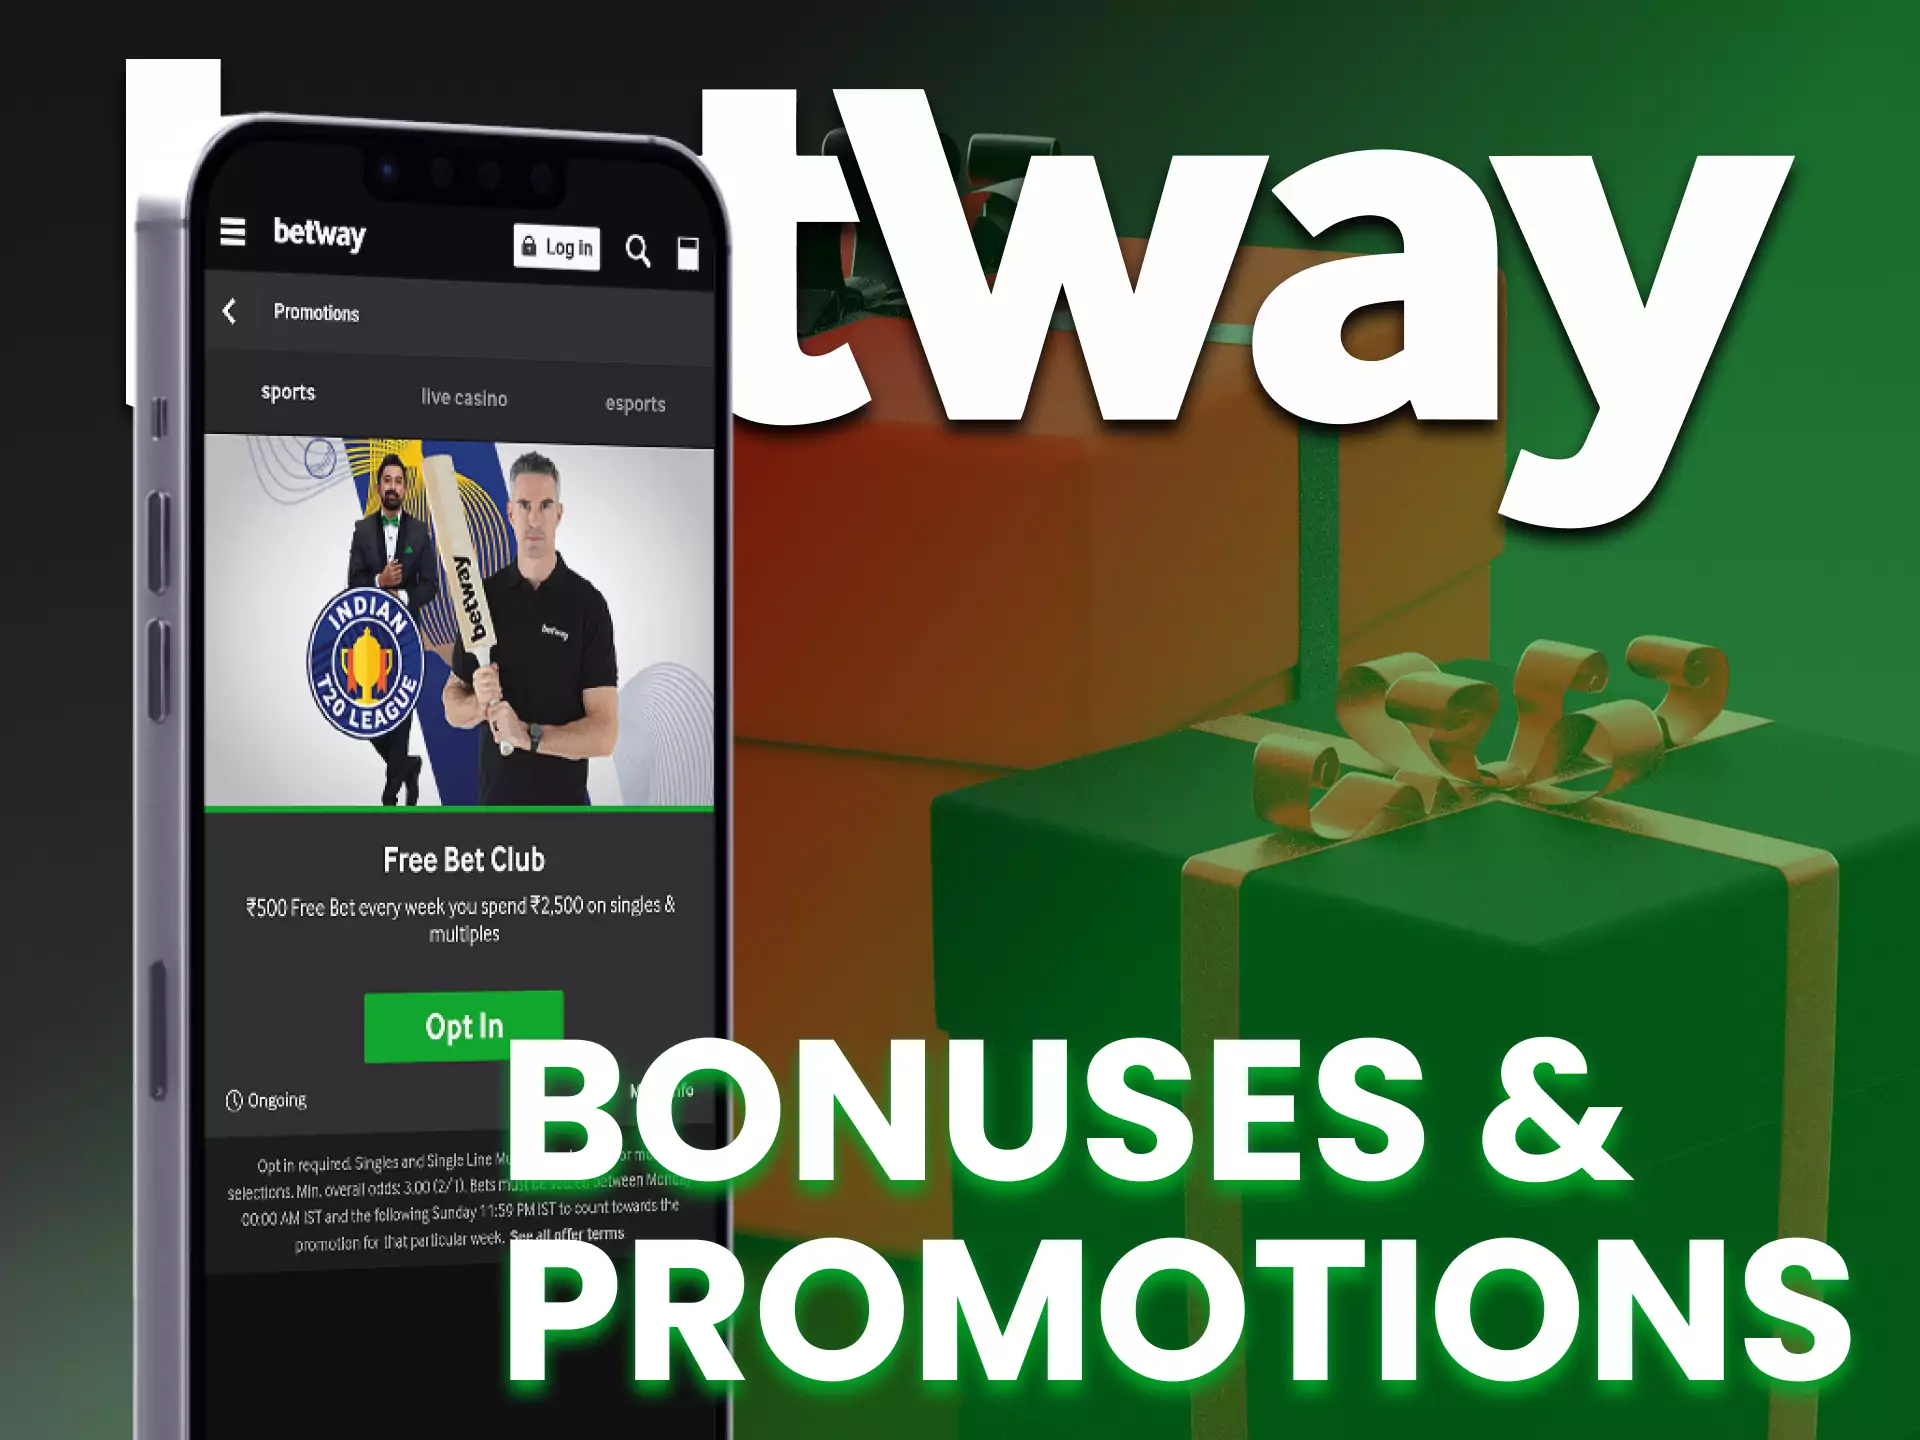 You can find various bonuses and promotions in the Betway app.